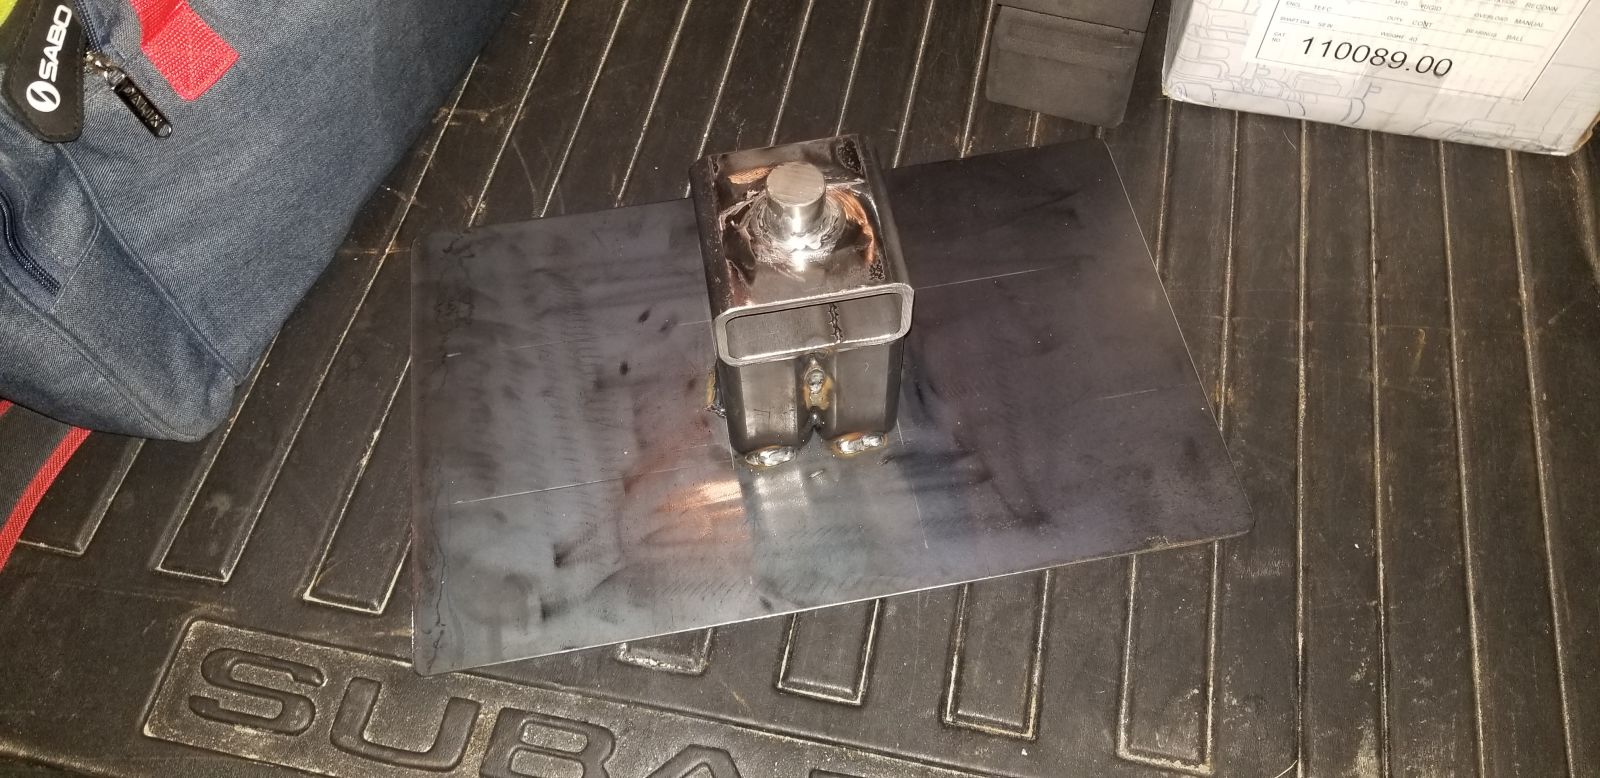 Made this adapter for getting the transmission out.